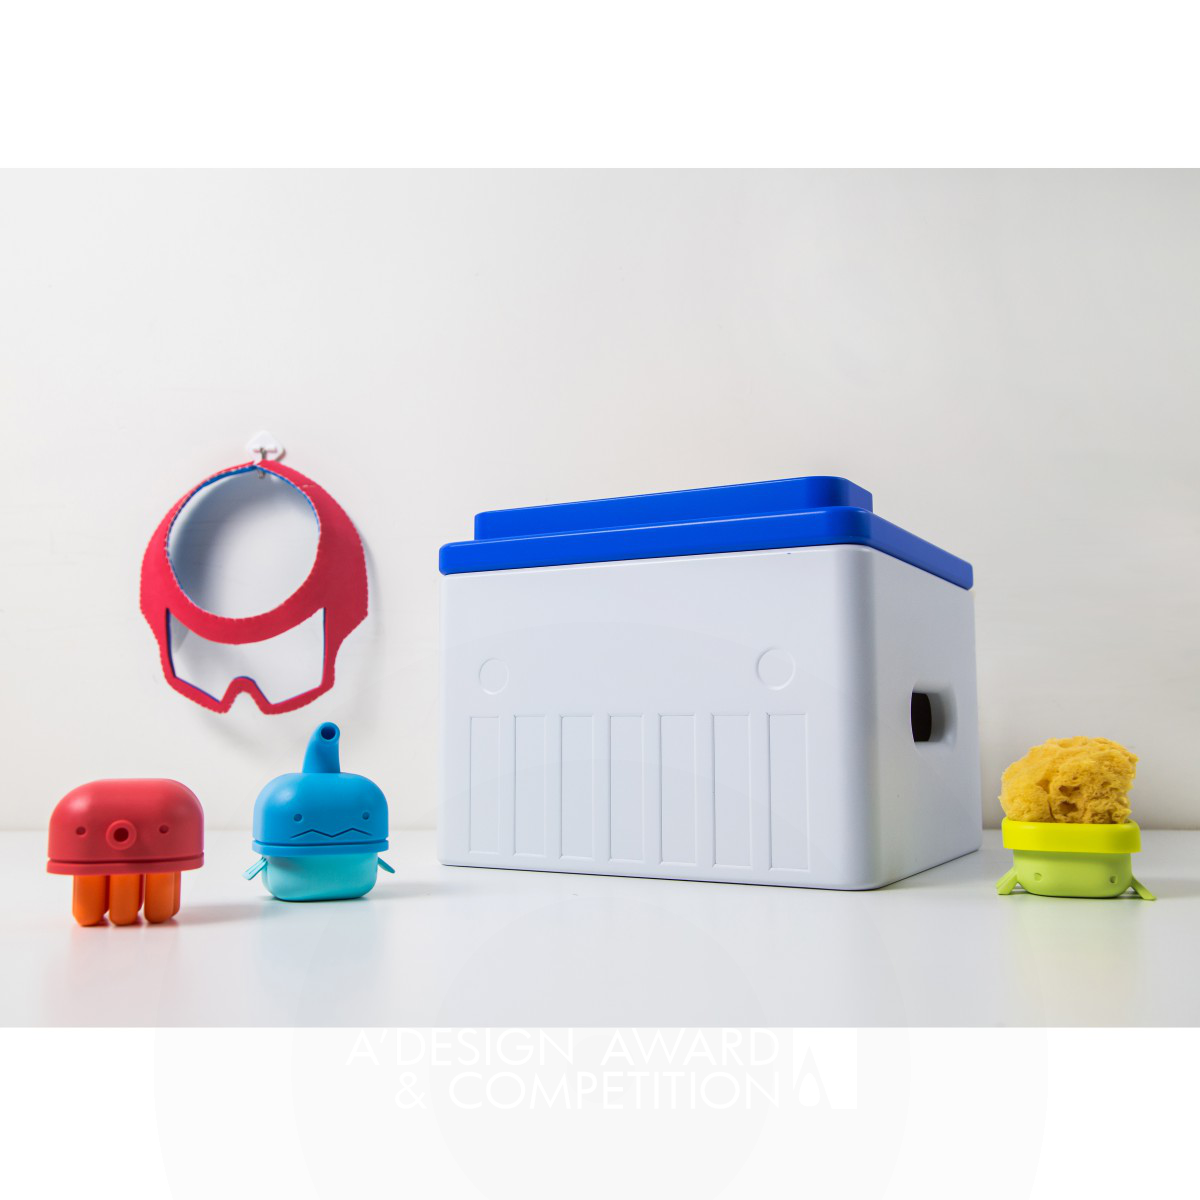 SplashBuddy: An Educational Toy for Interactive Bath Time